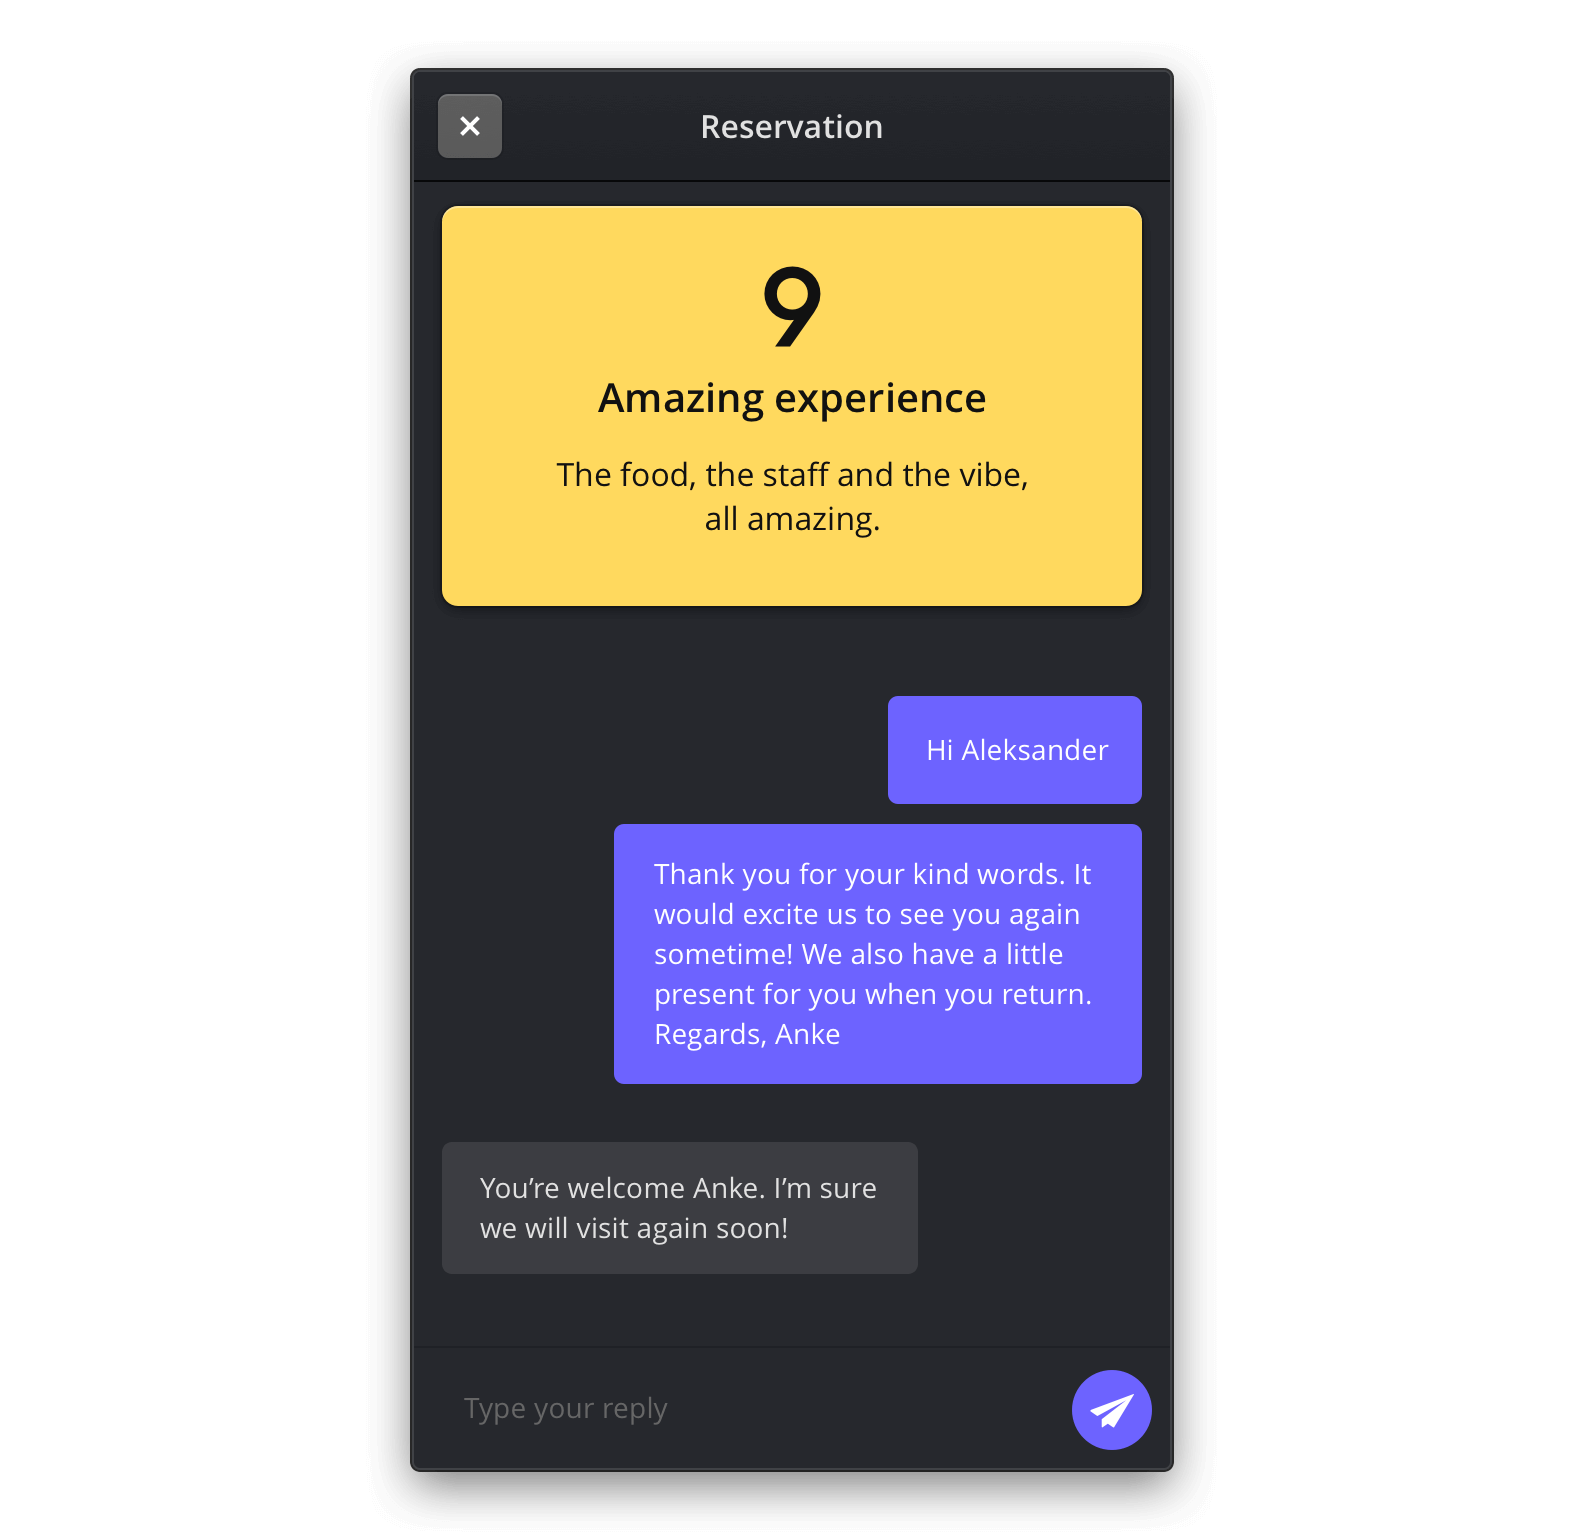 Send messages to your guests about their reservation